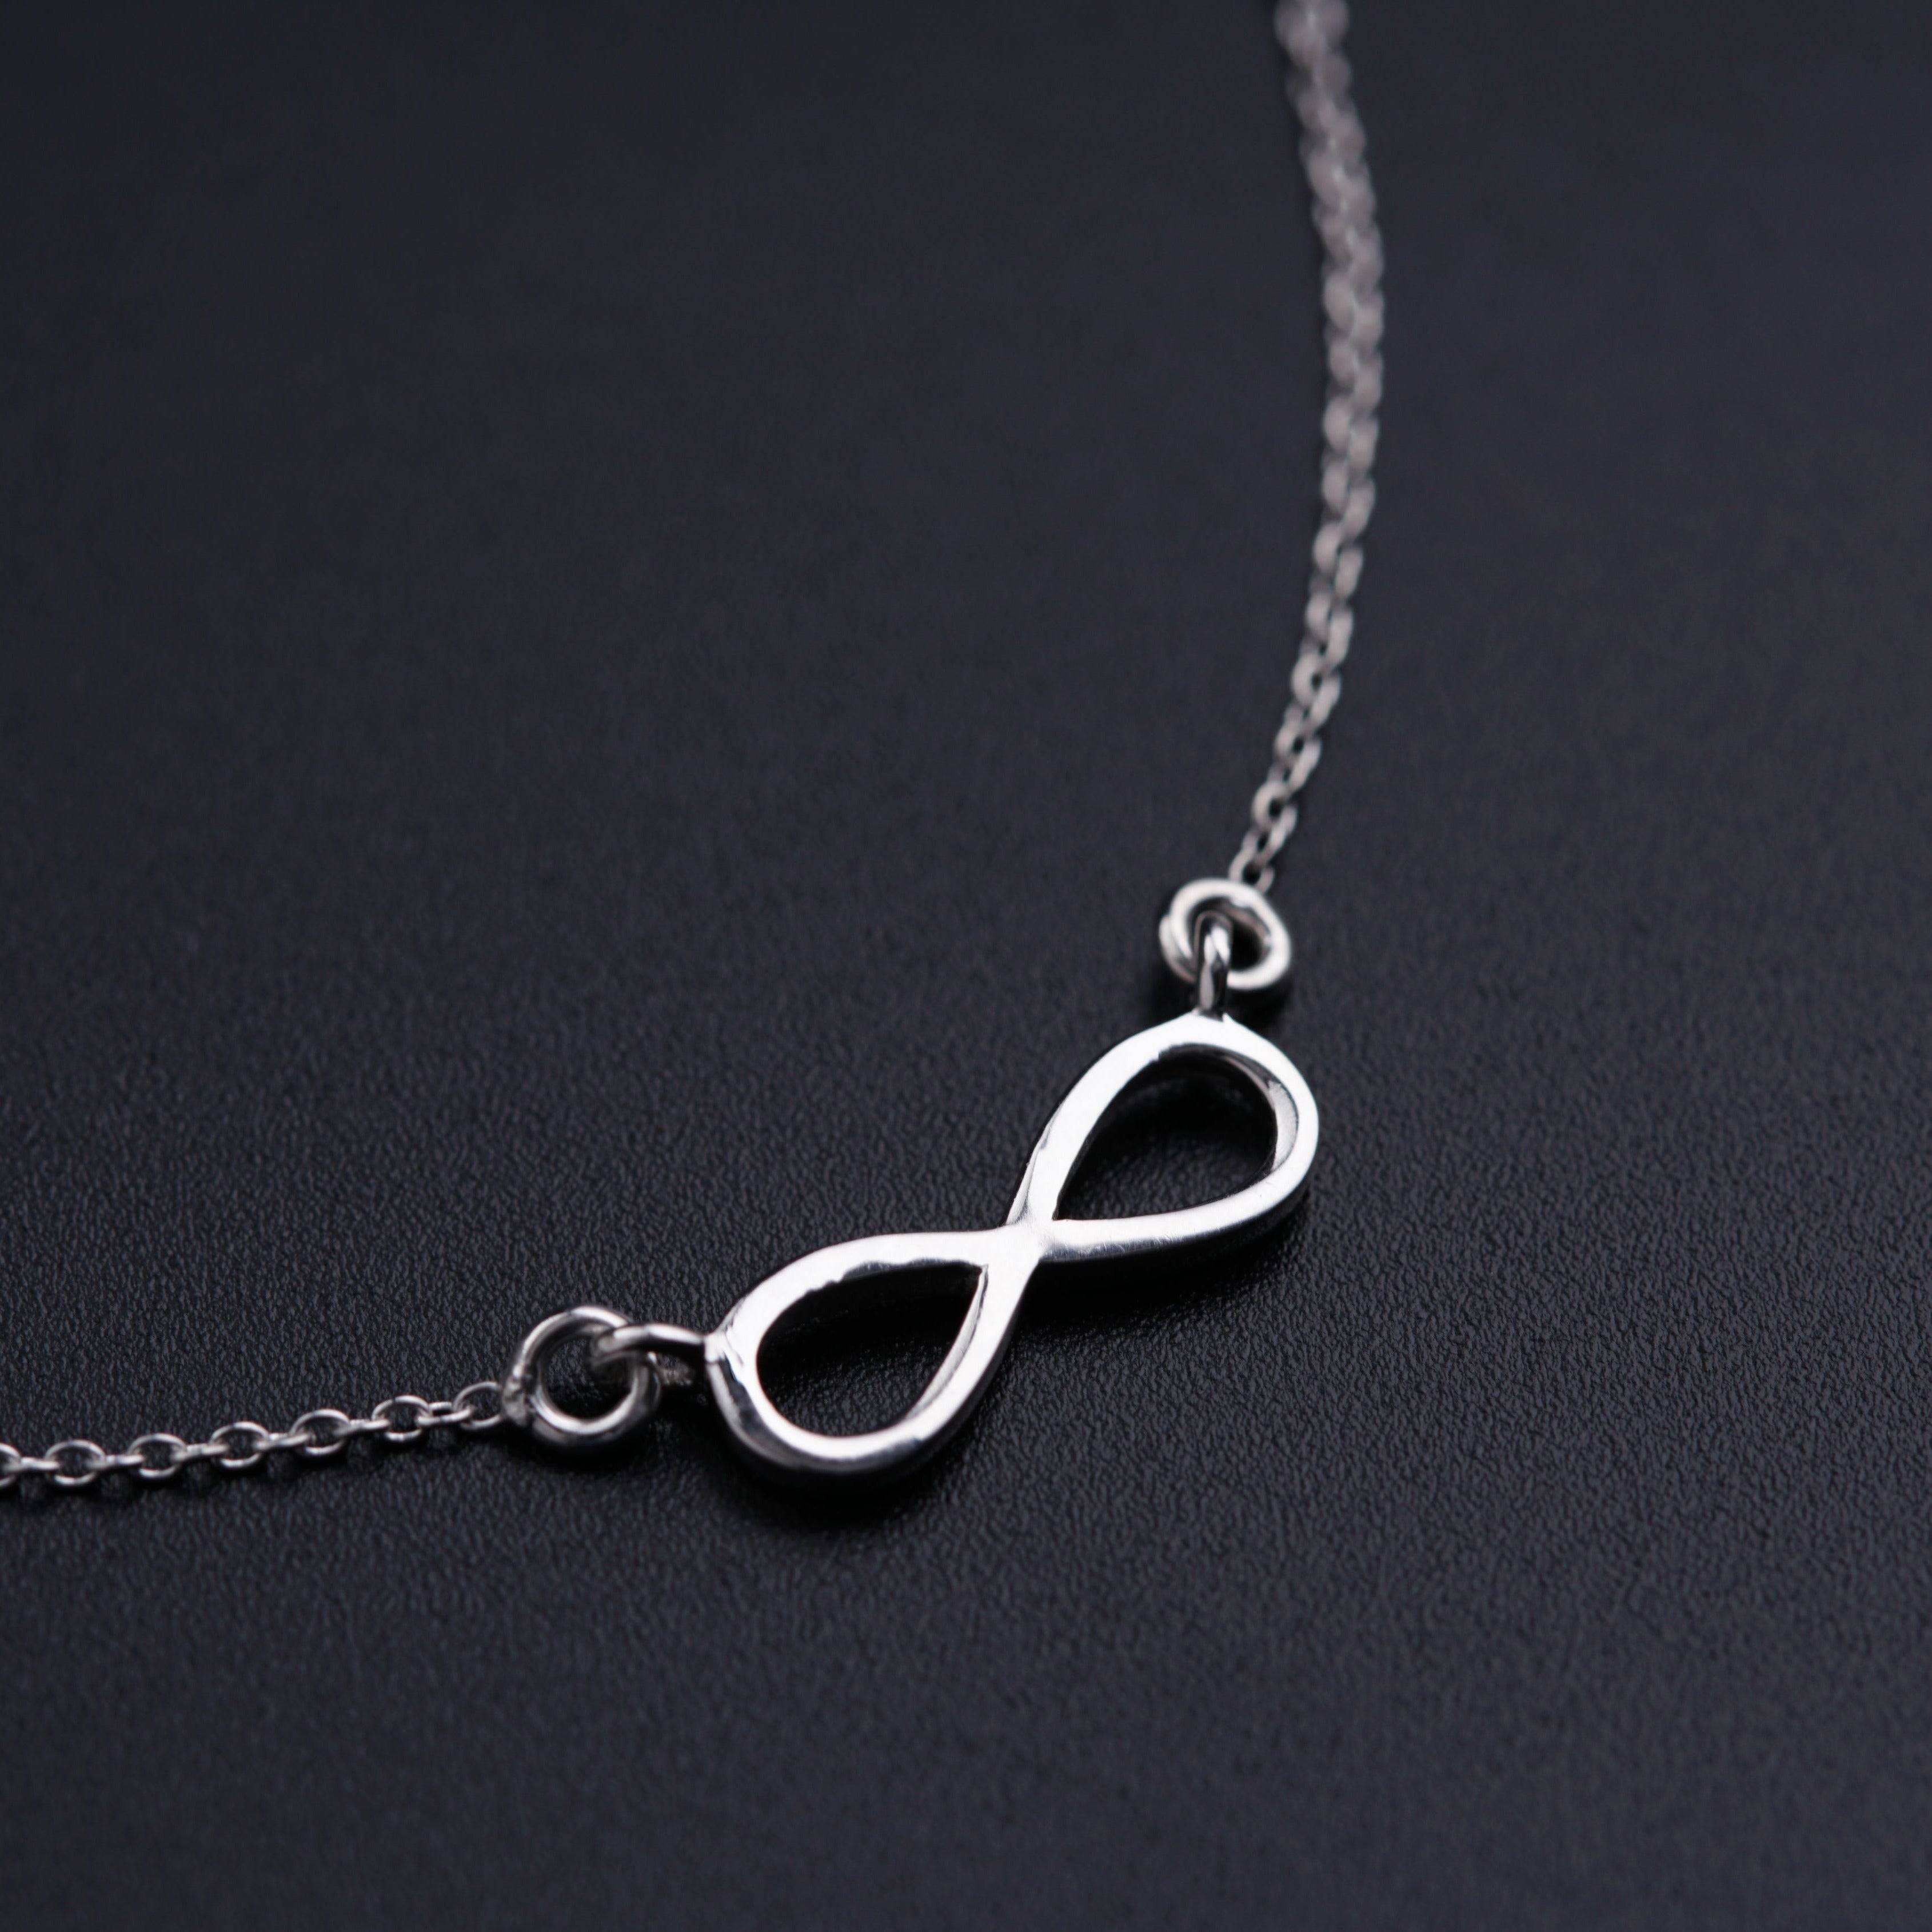 a silver necklace with an infinite symbol on it